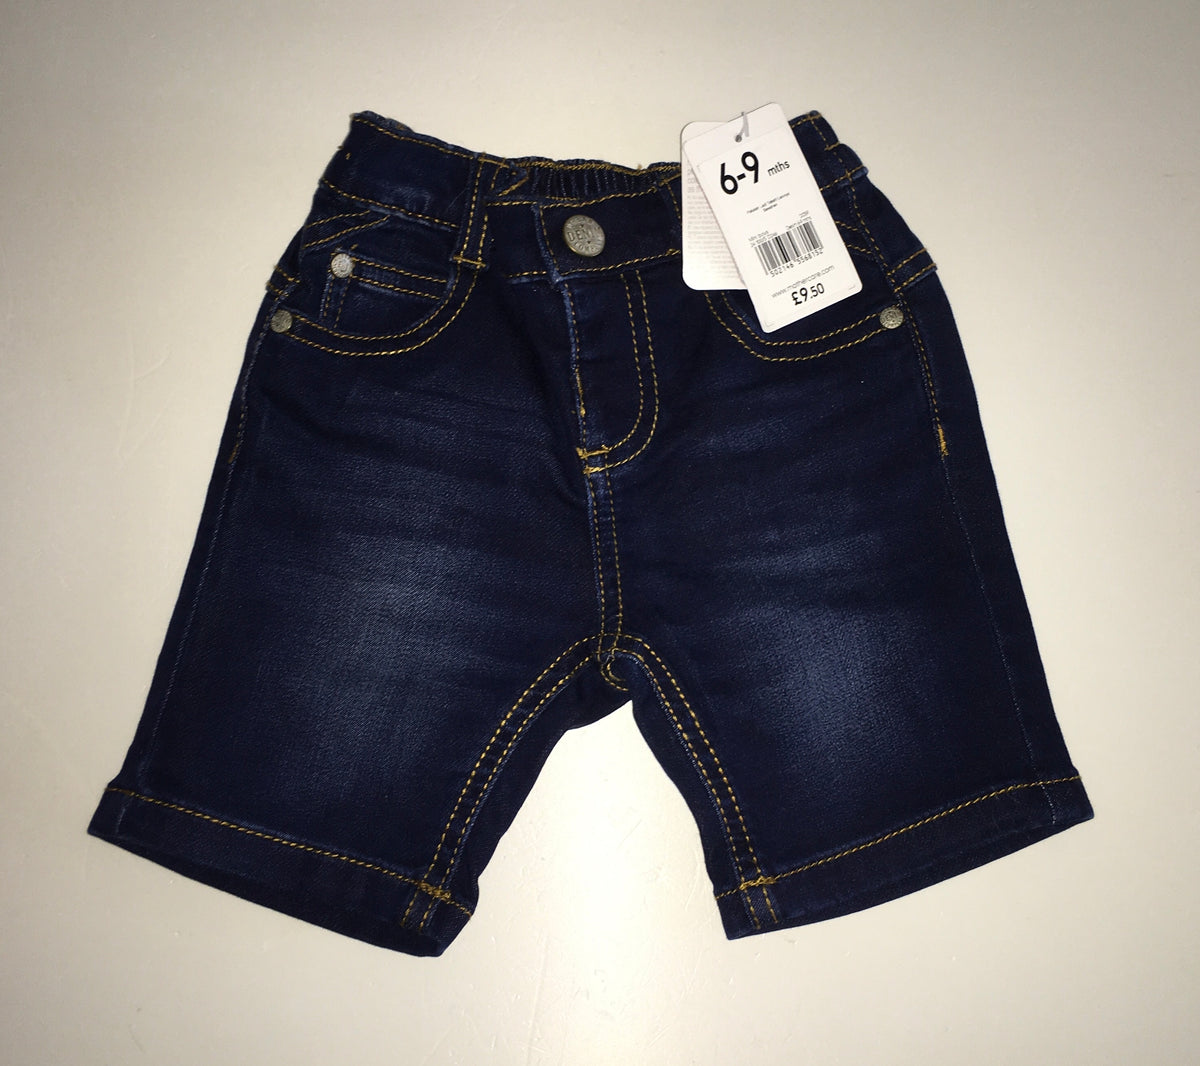 Mothercare Shorts, BNWT, Boys 6-9 Months